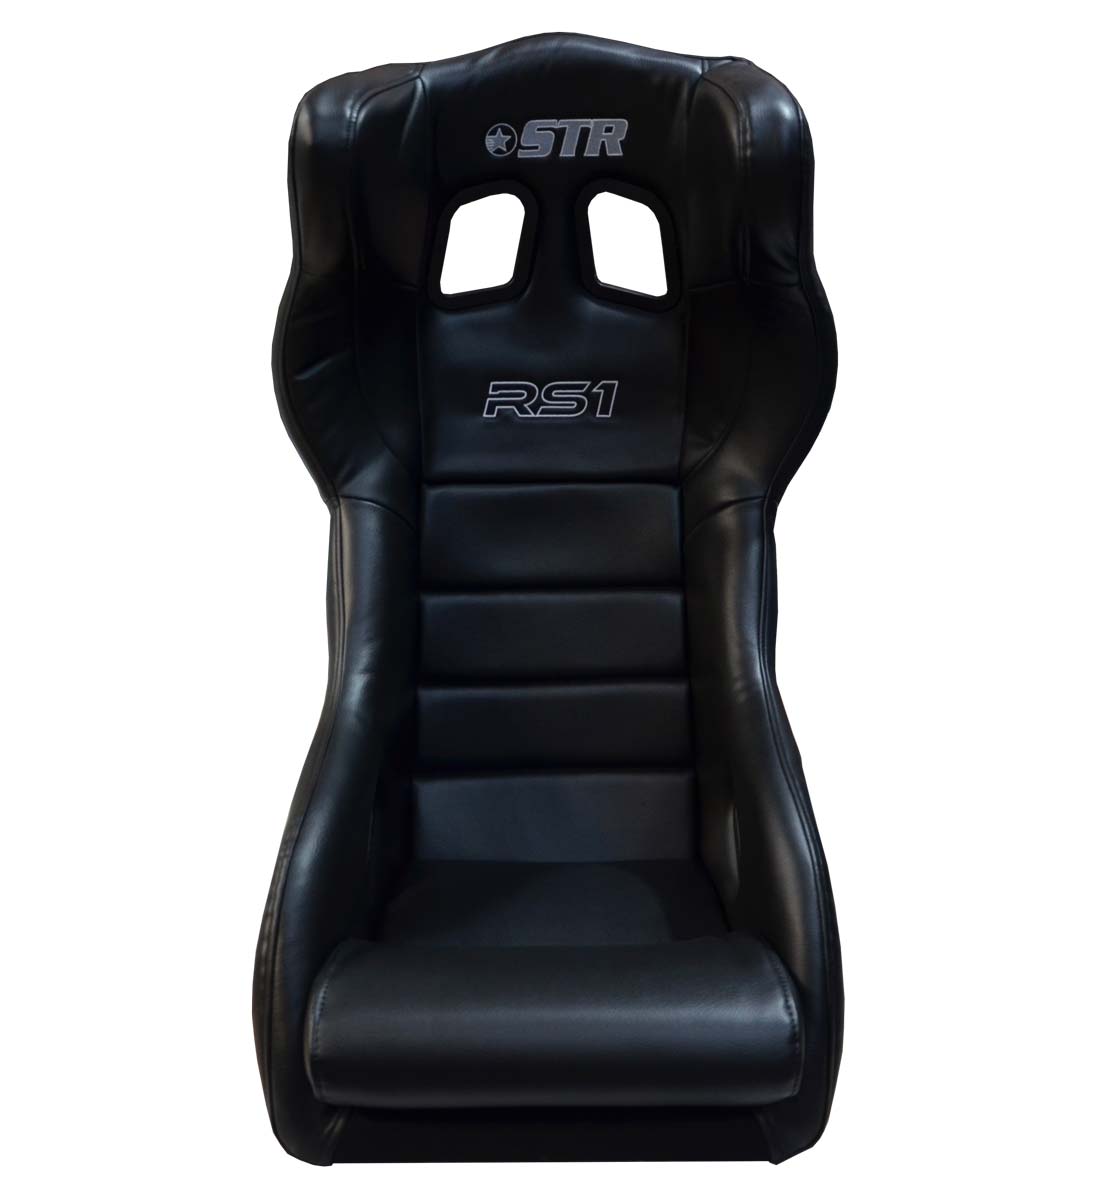 STR 'RS1' FIA Approved Race Seat - 2028 Black PVC Leather